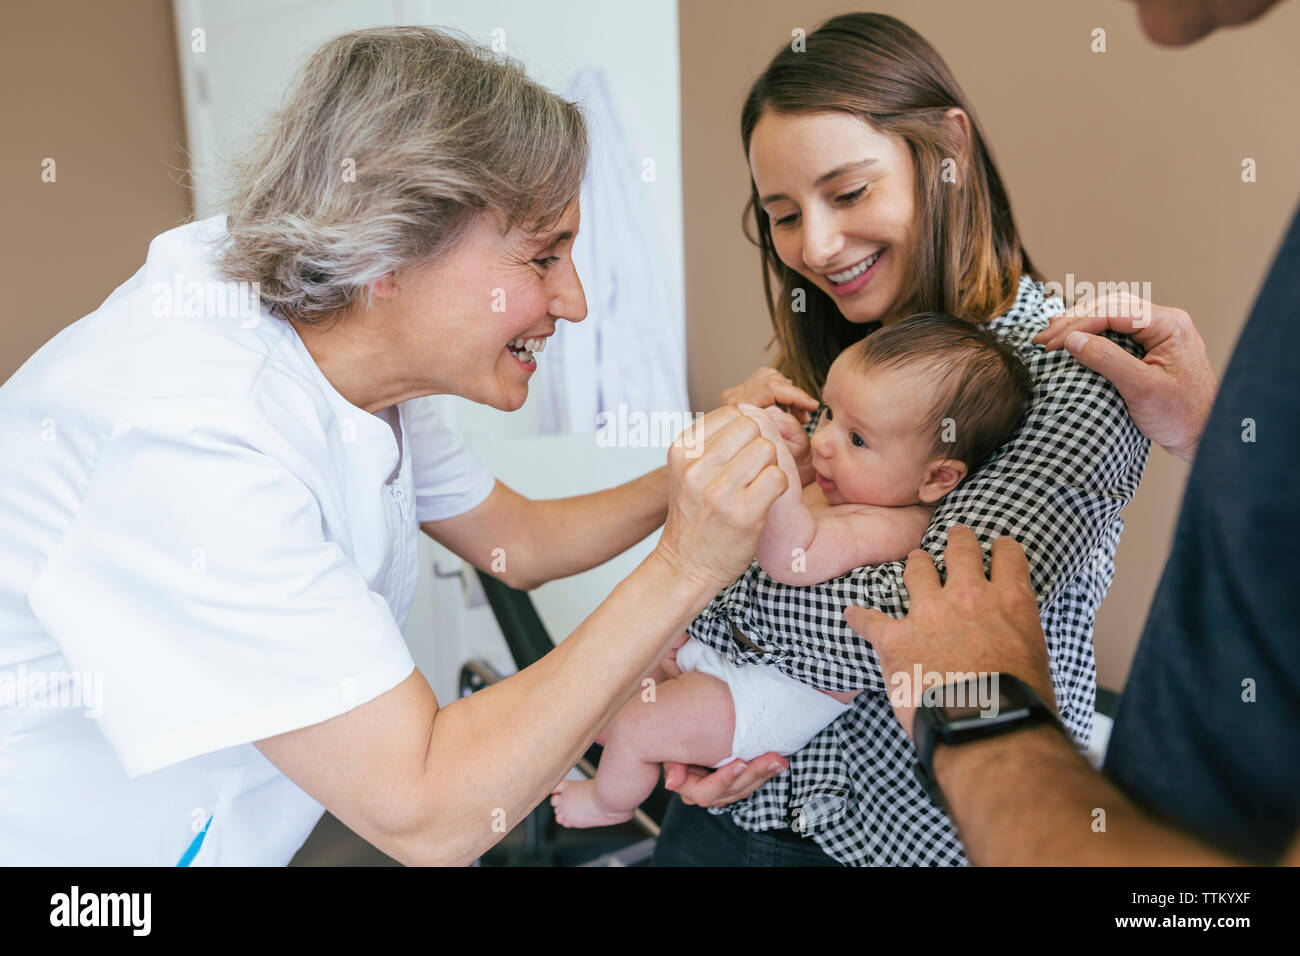 Smiling mother looking at doctor playing with baby boy in examination room Stock Photo